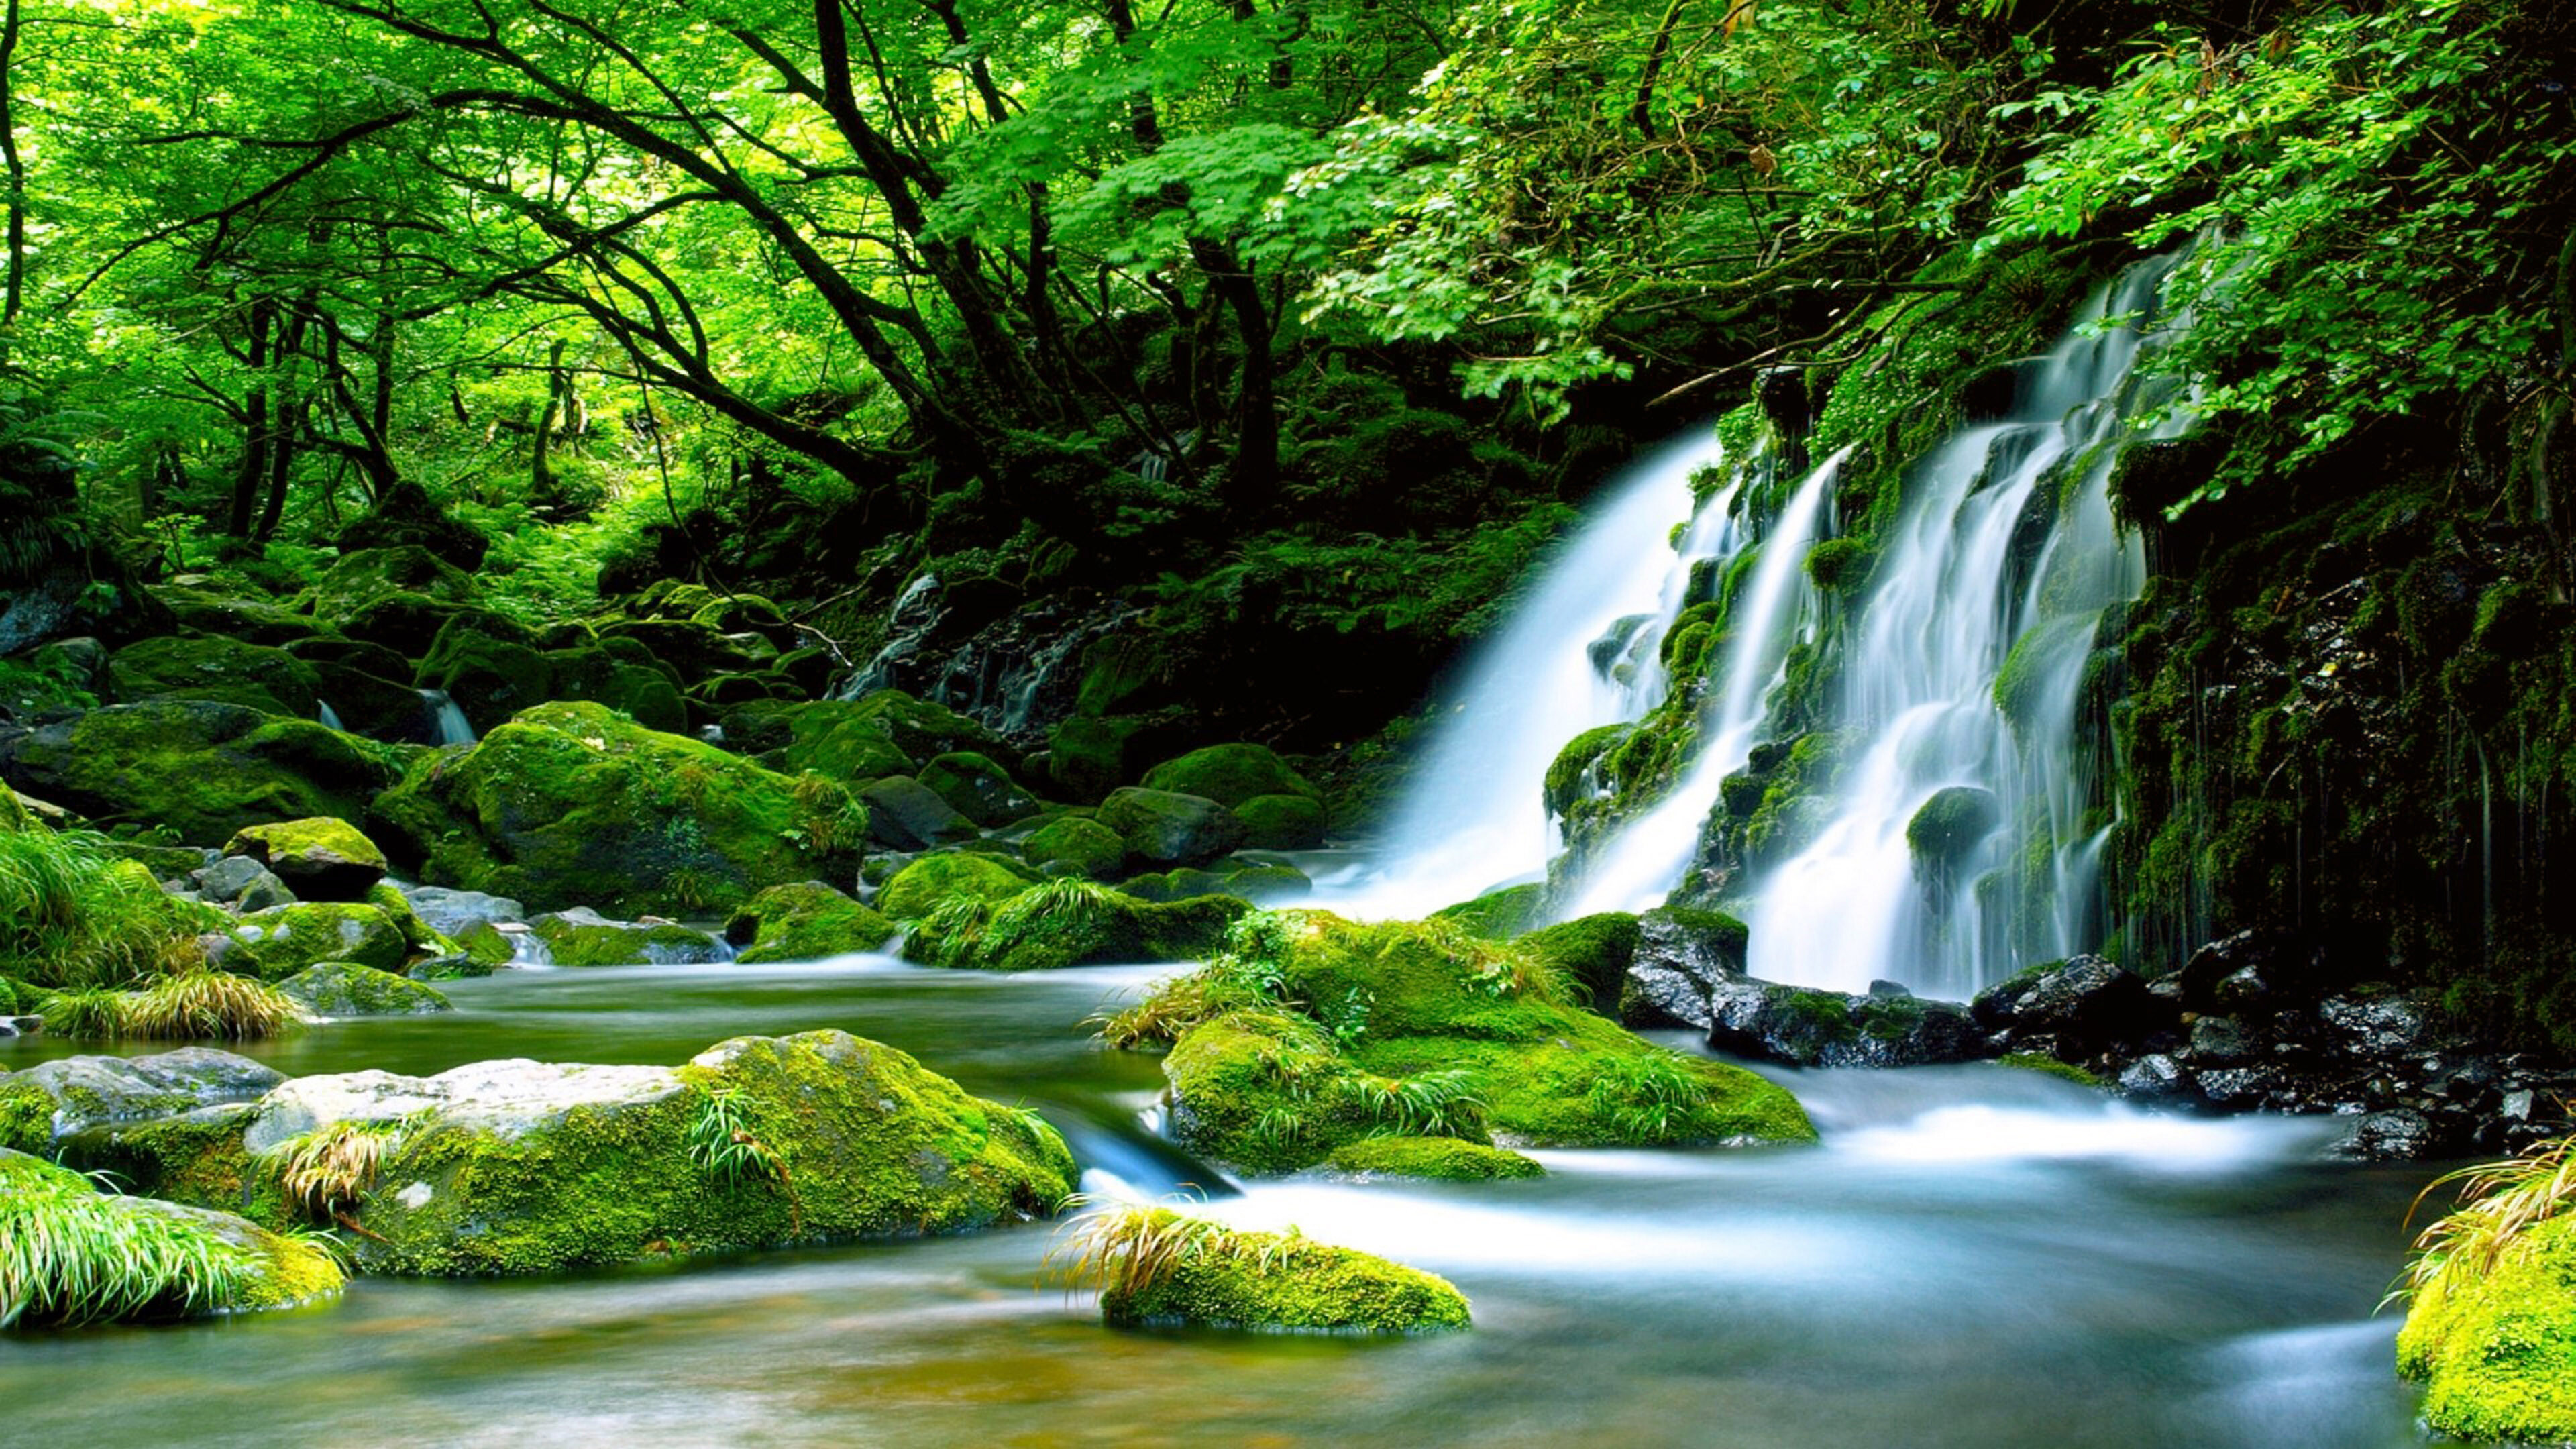 Waterfall: River, Rocks Covered With Green Moss, Forest, Stream. 3840x2160 4K Wallpaper.